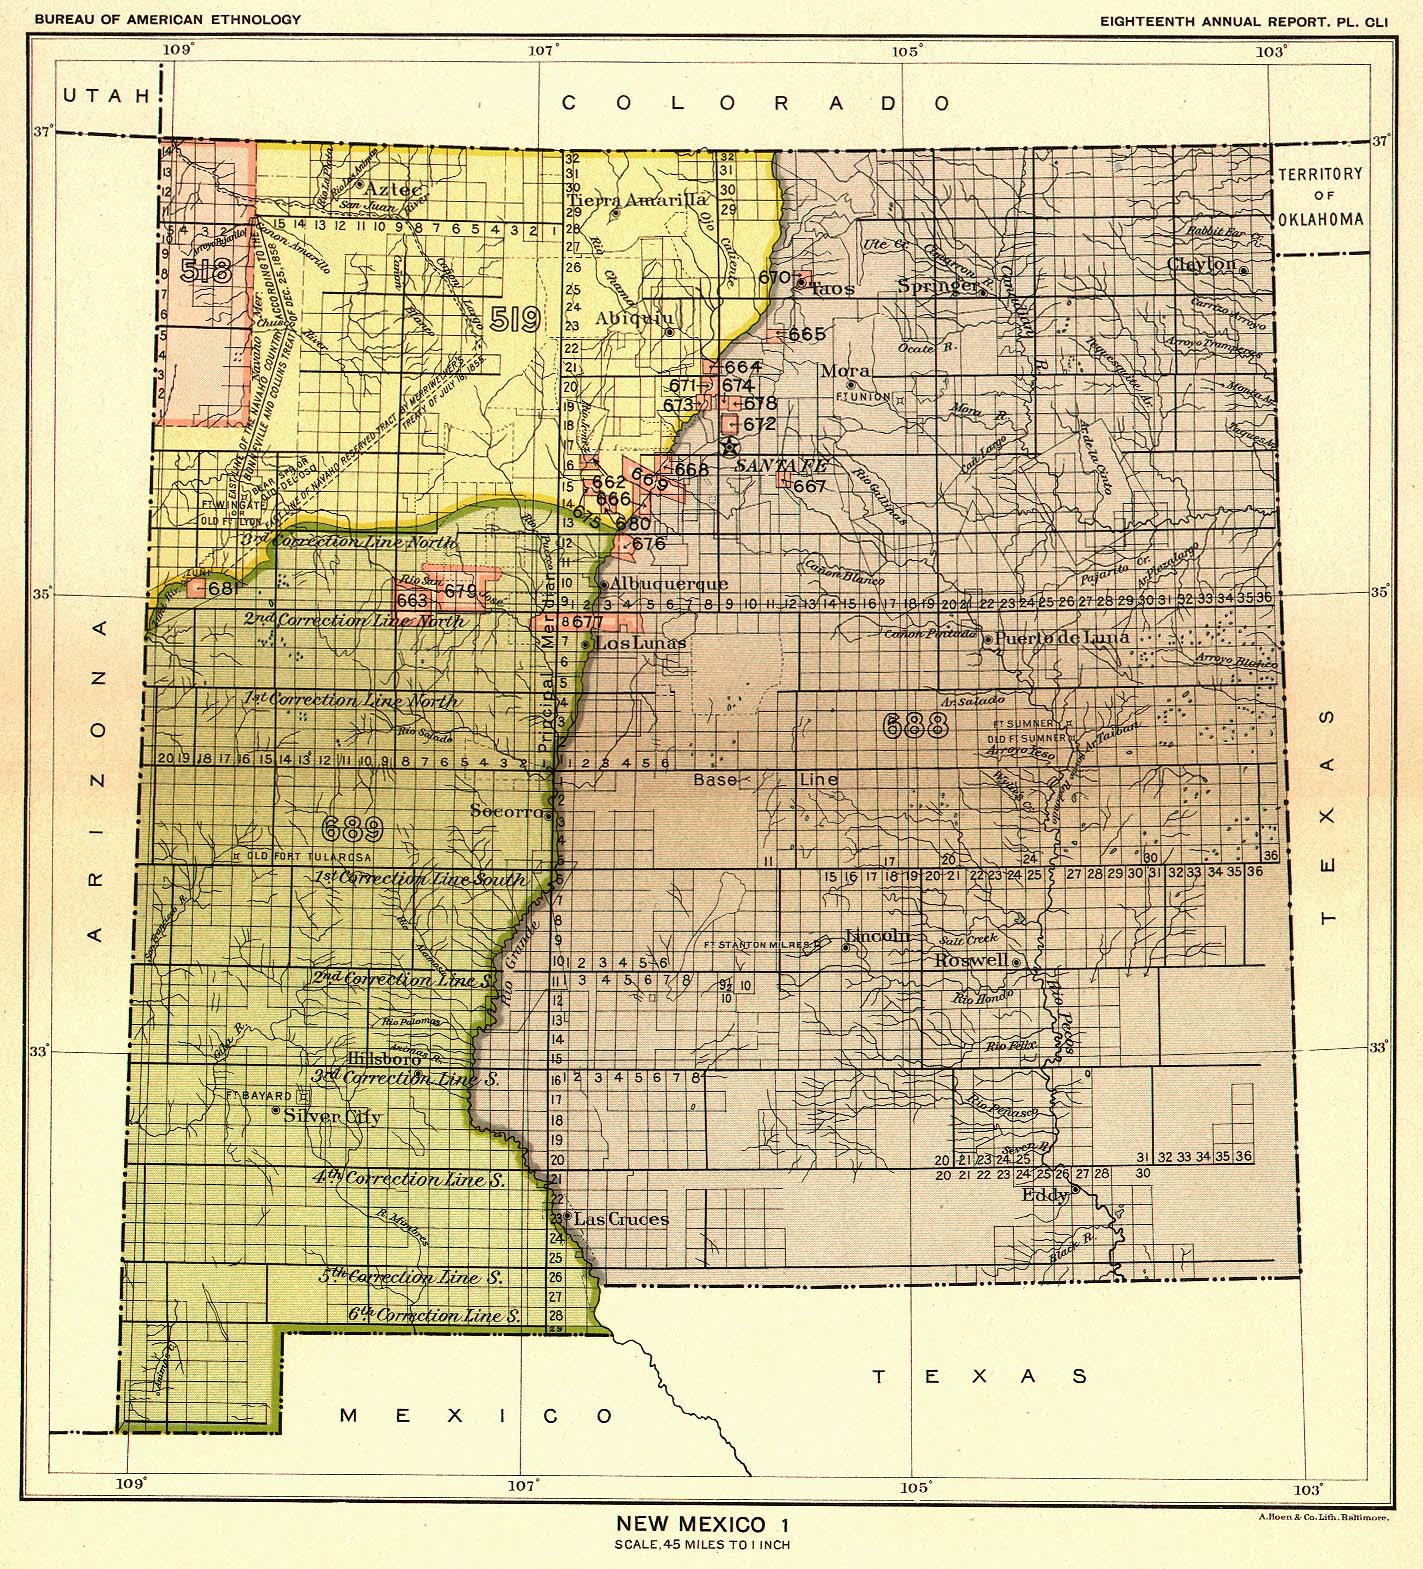 New Mexico 1, Map 44